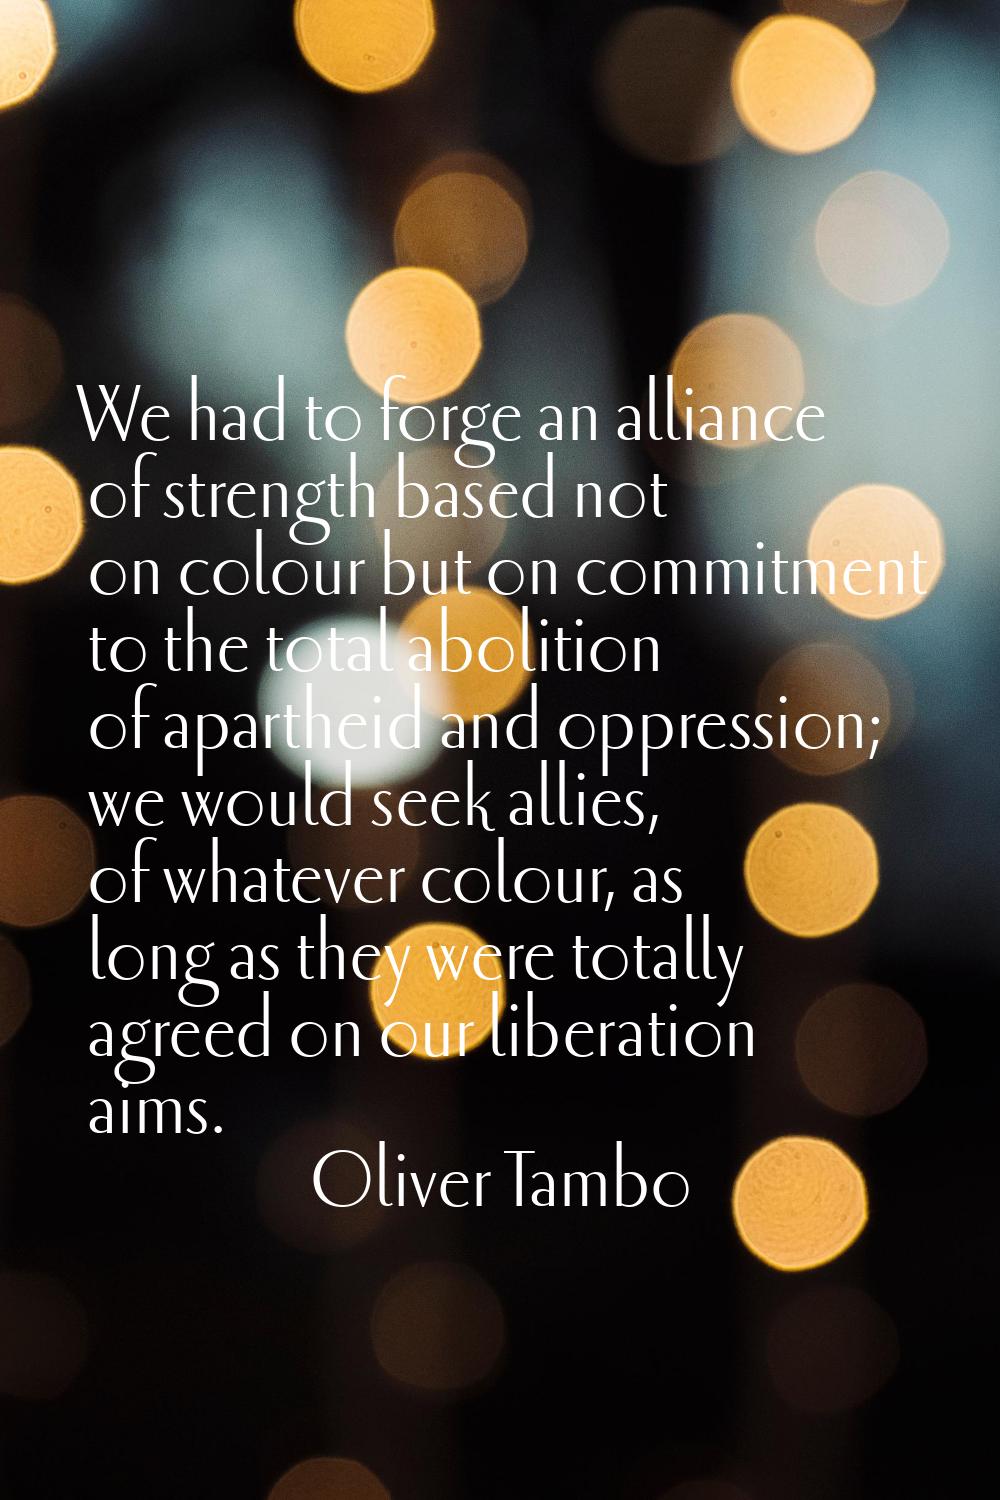 We had to forge an alliance of strength based not on colour but on commitment to the total abolitio